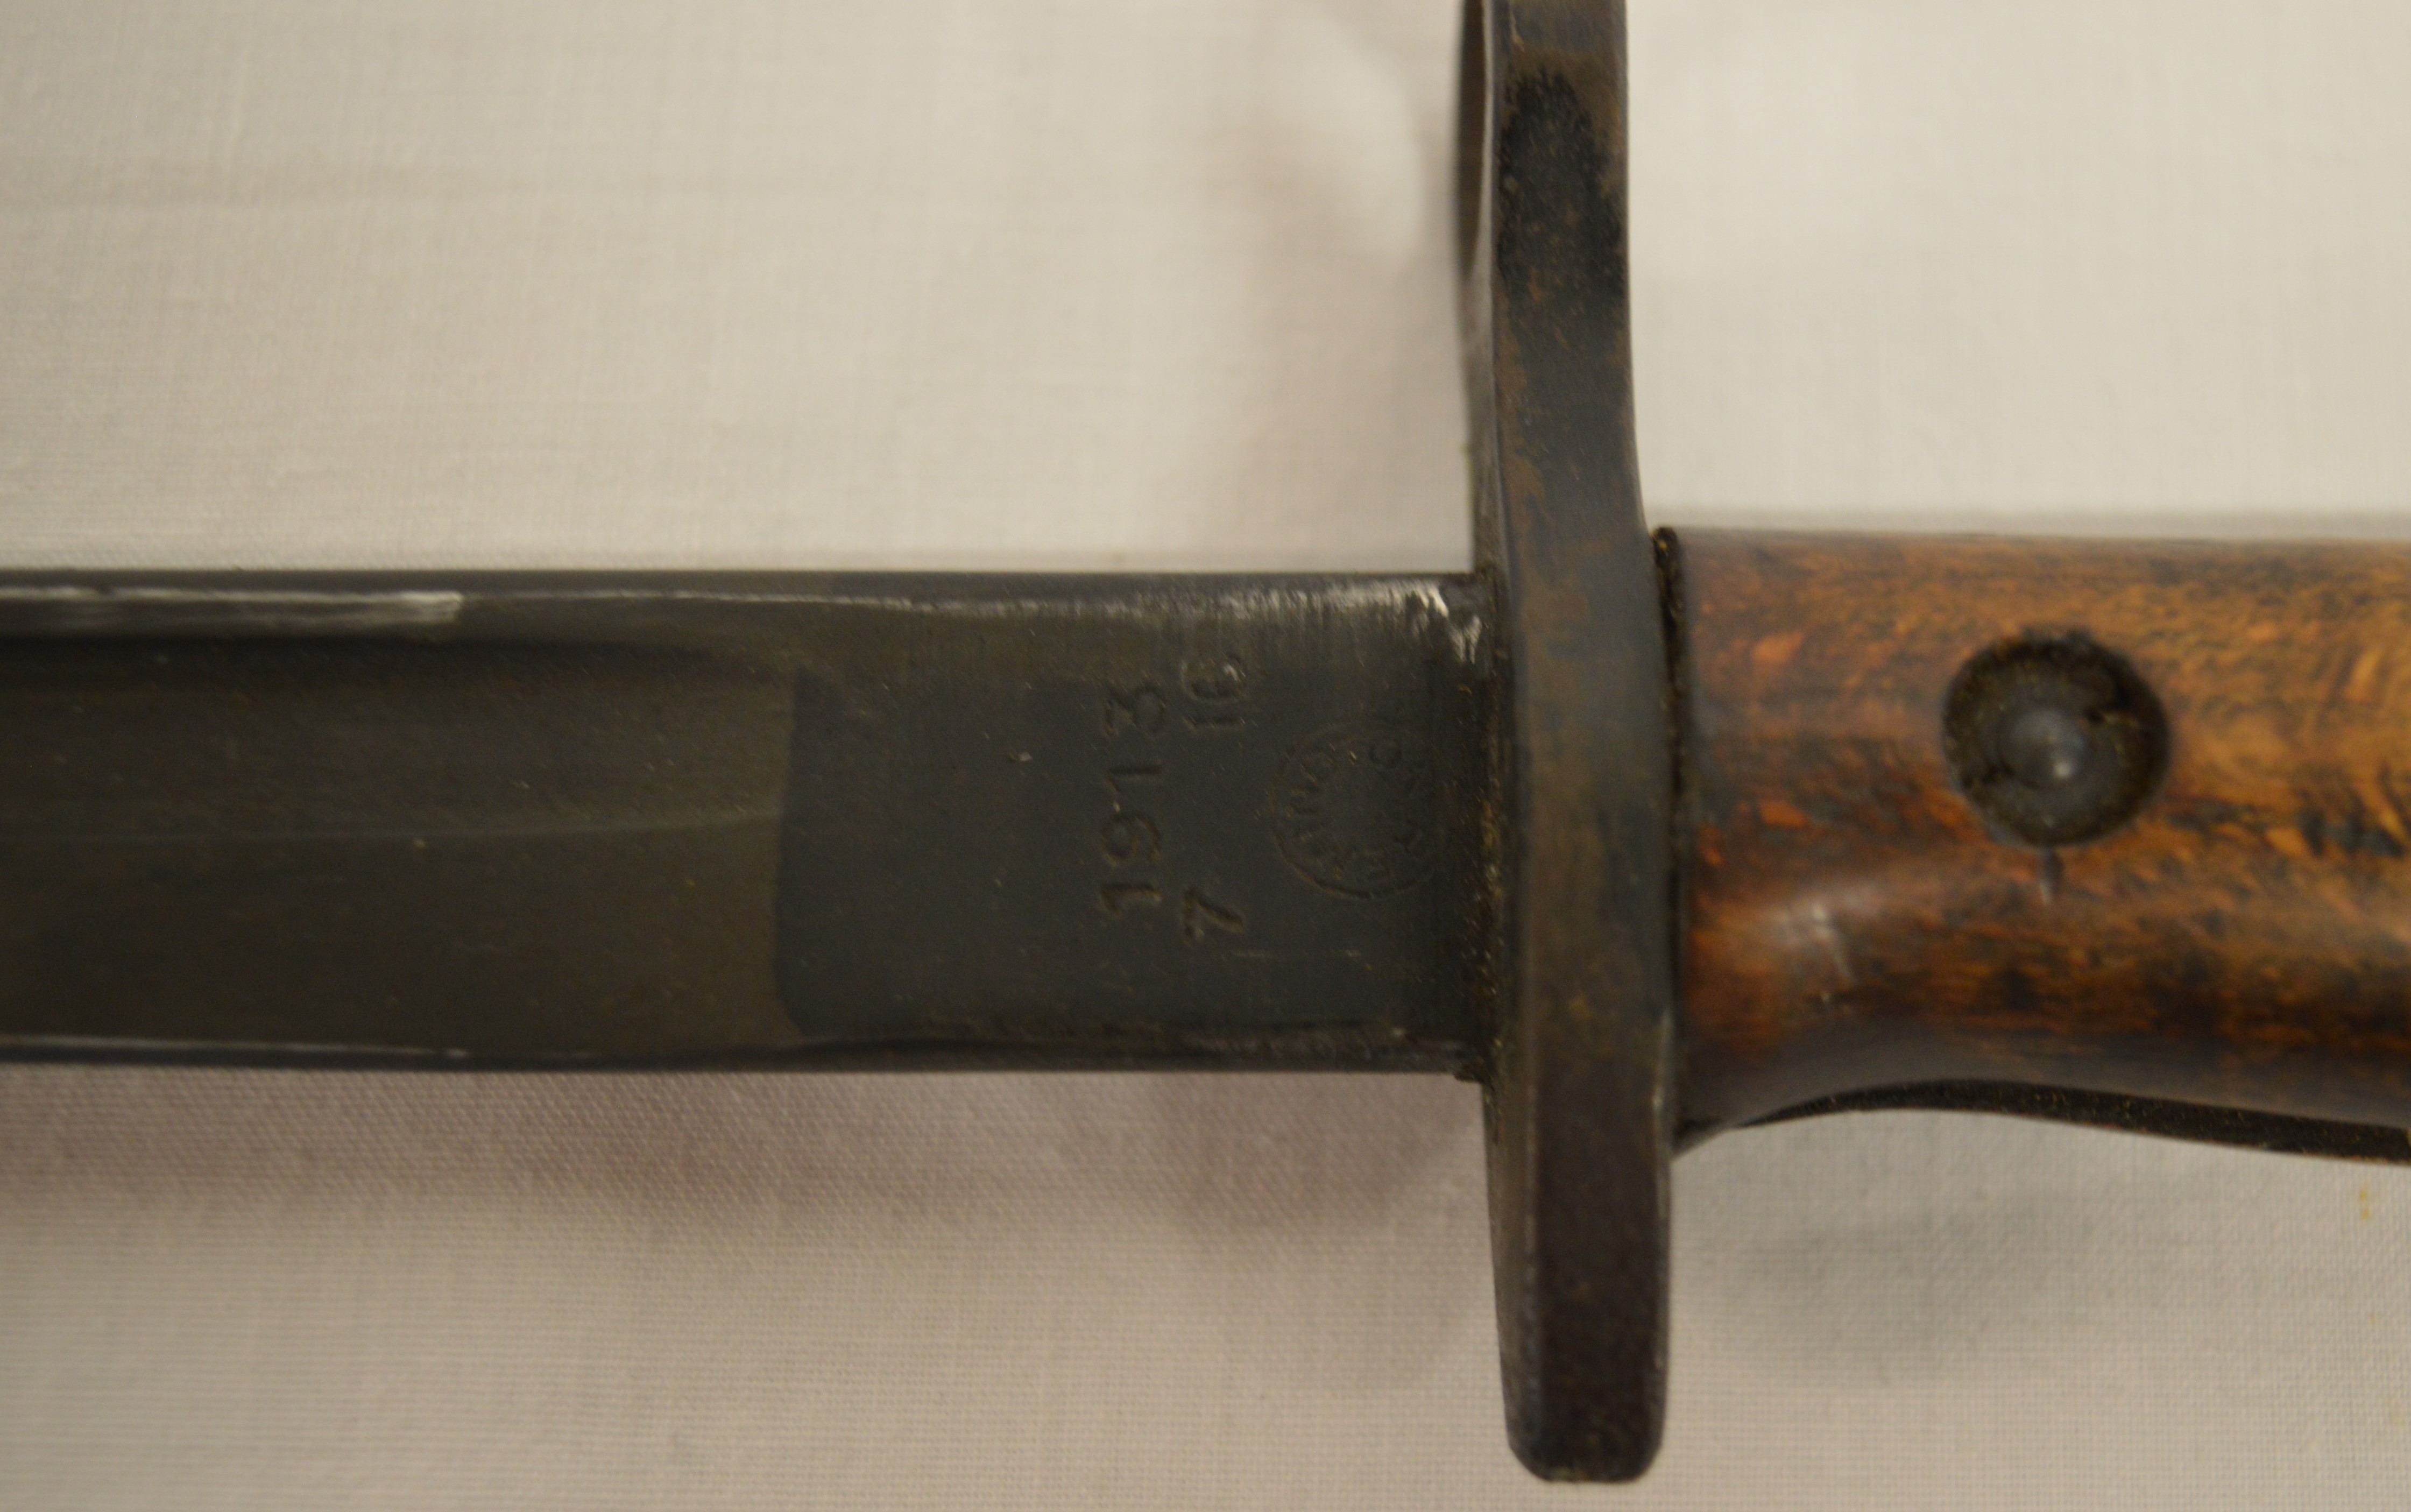 1913 7 16 Remington bayonet with scabbard - Image 4 of 4